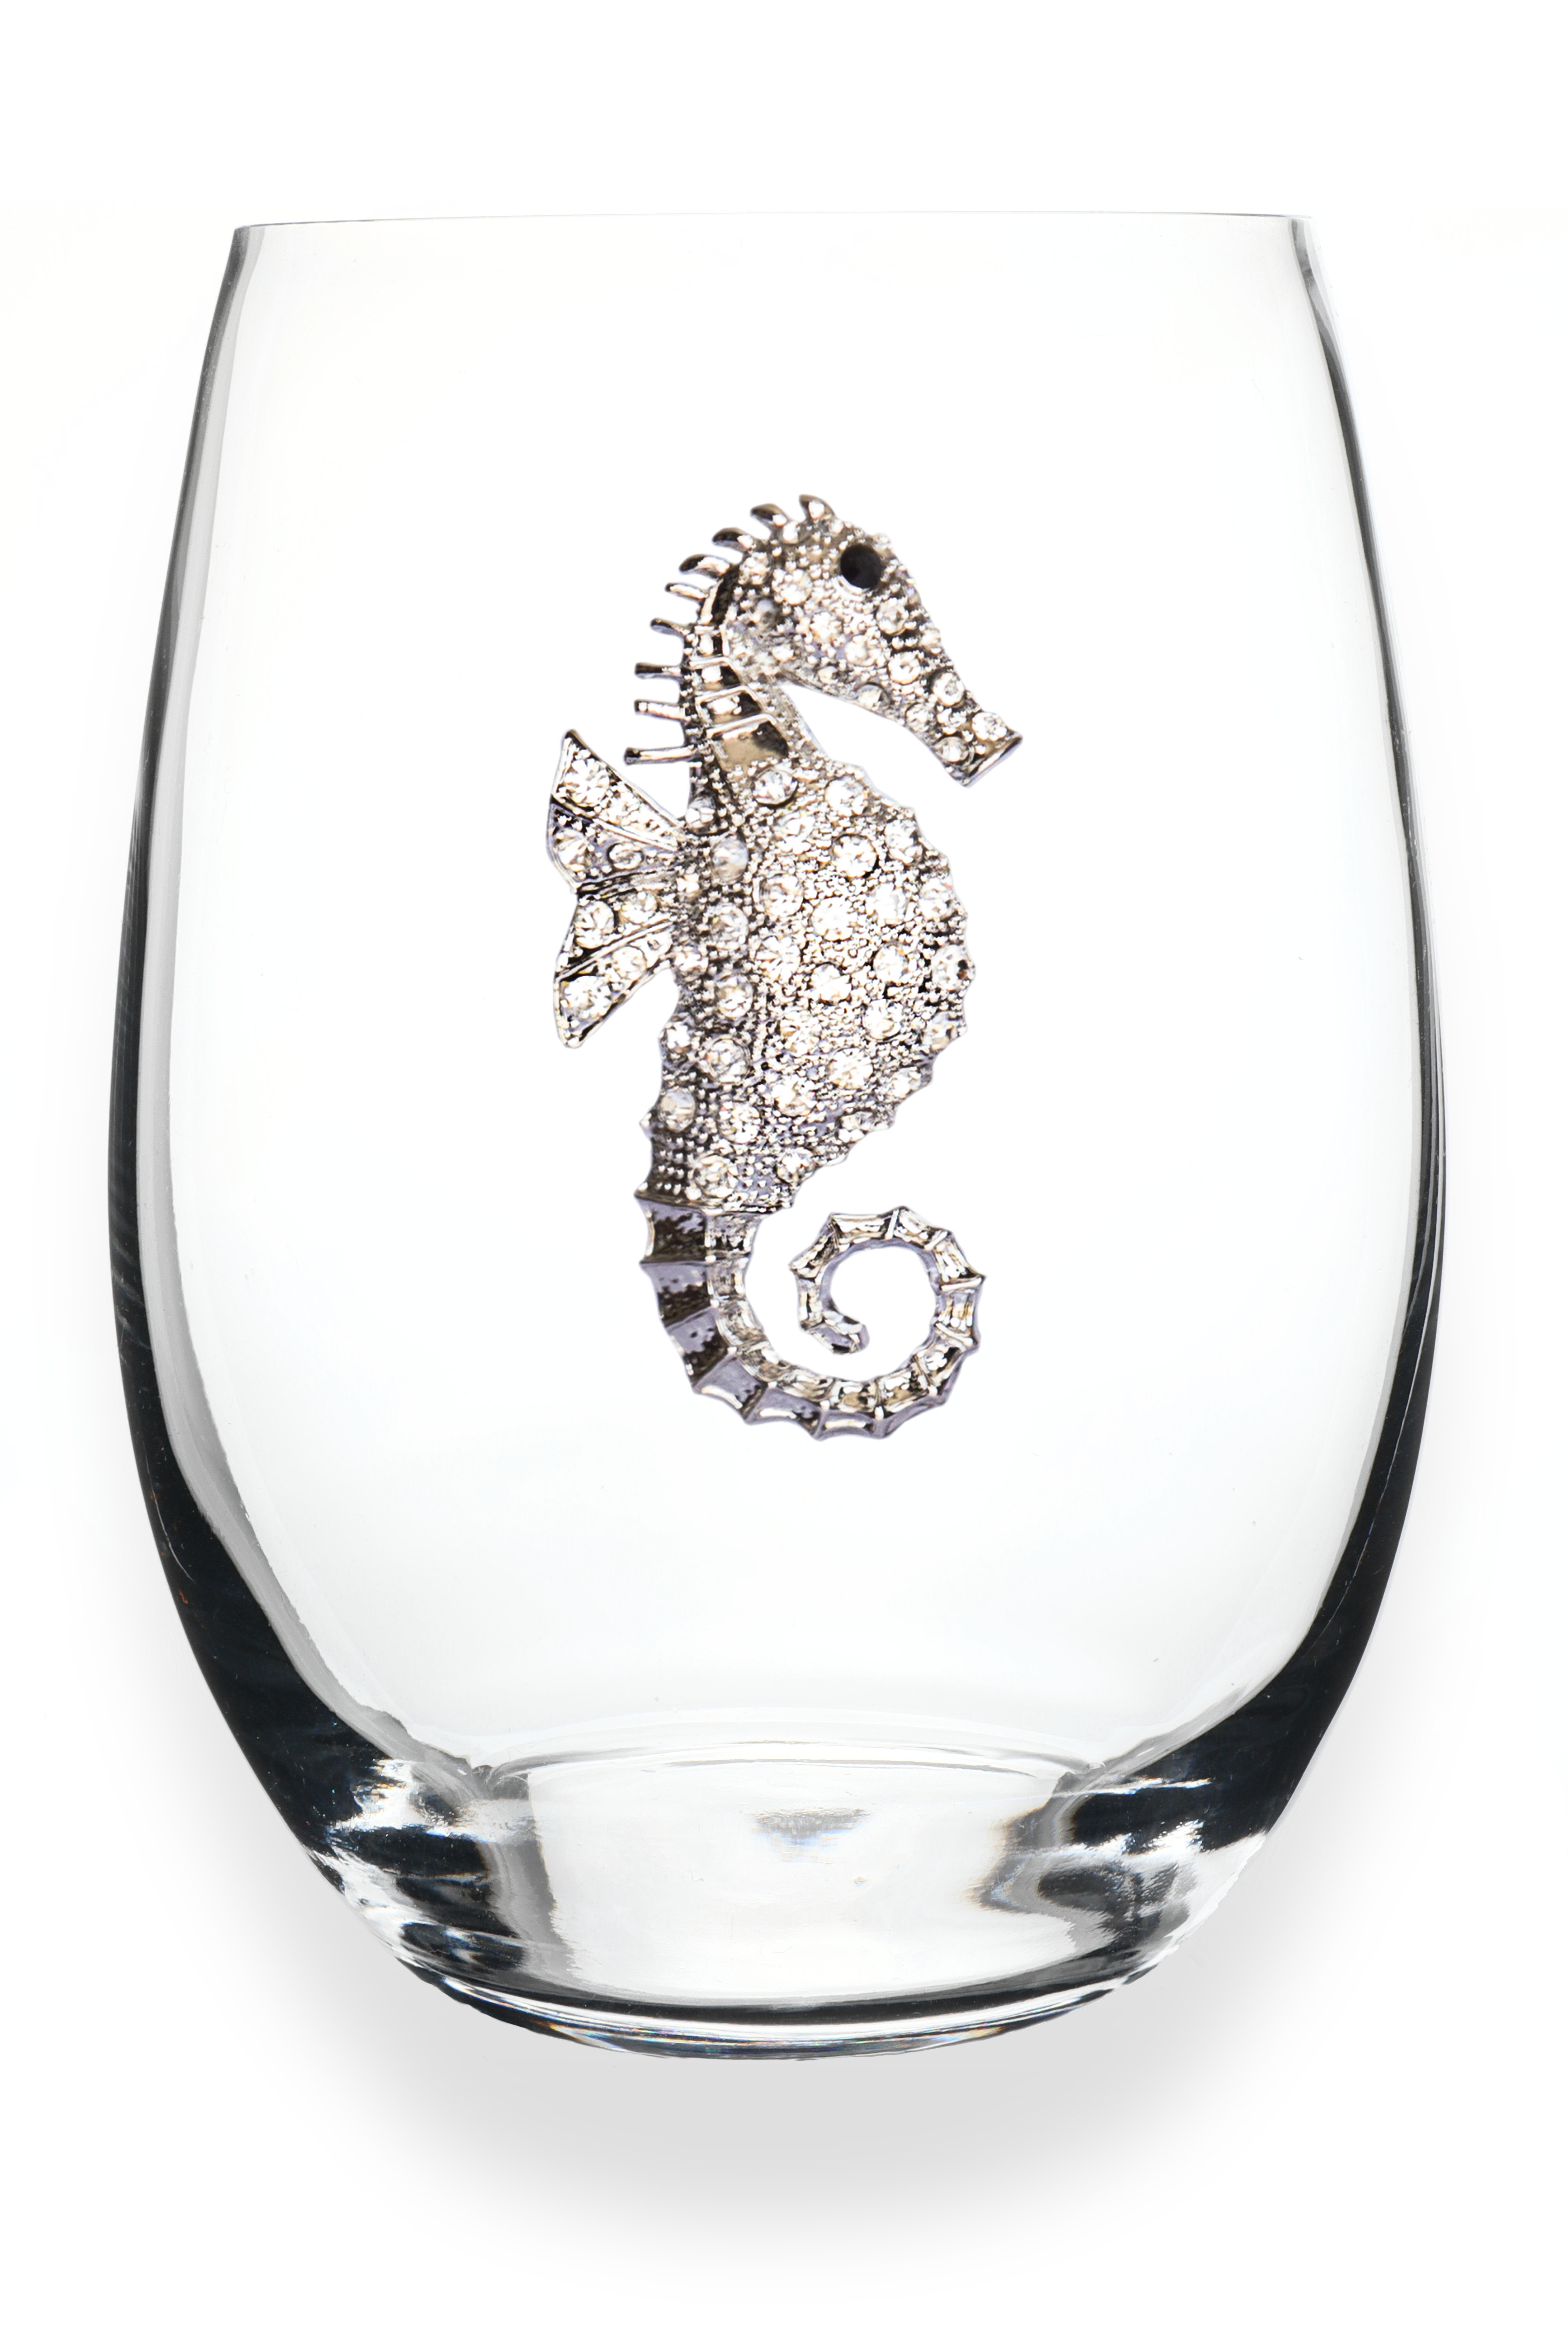 Seahorse Painted Beach Drinking Glasses Ocean Decor Stemless Wine Glasses Unique 